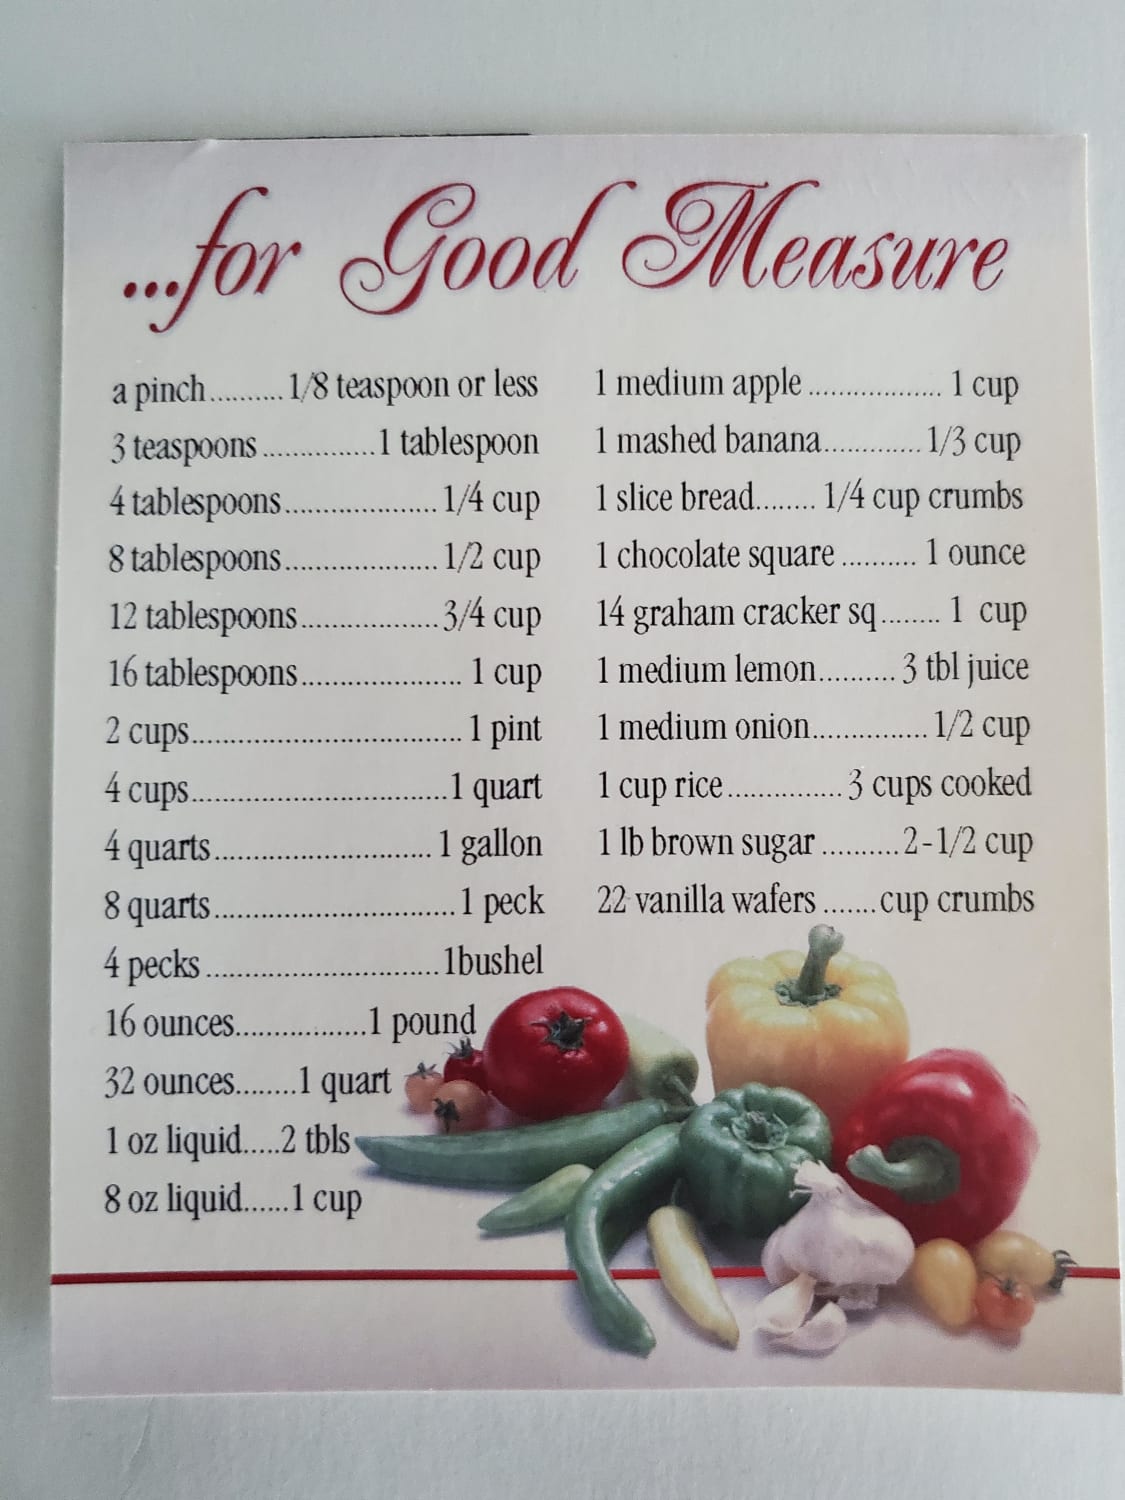 A nifty measurement guide that my family keeps in the kitchen